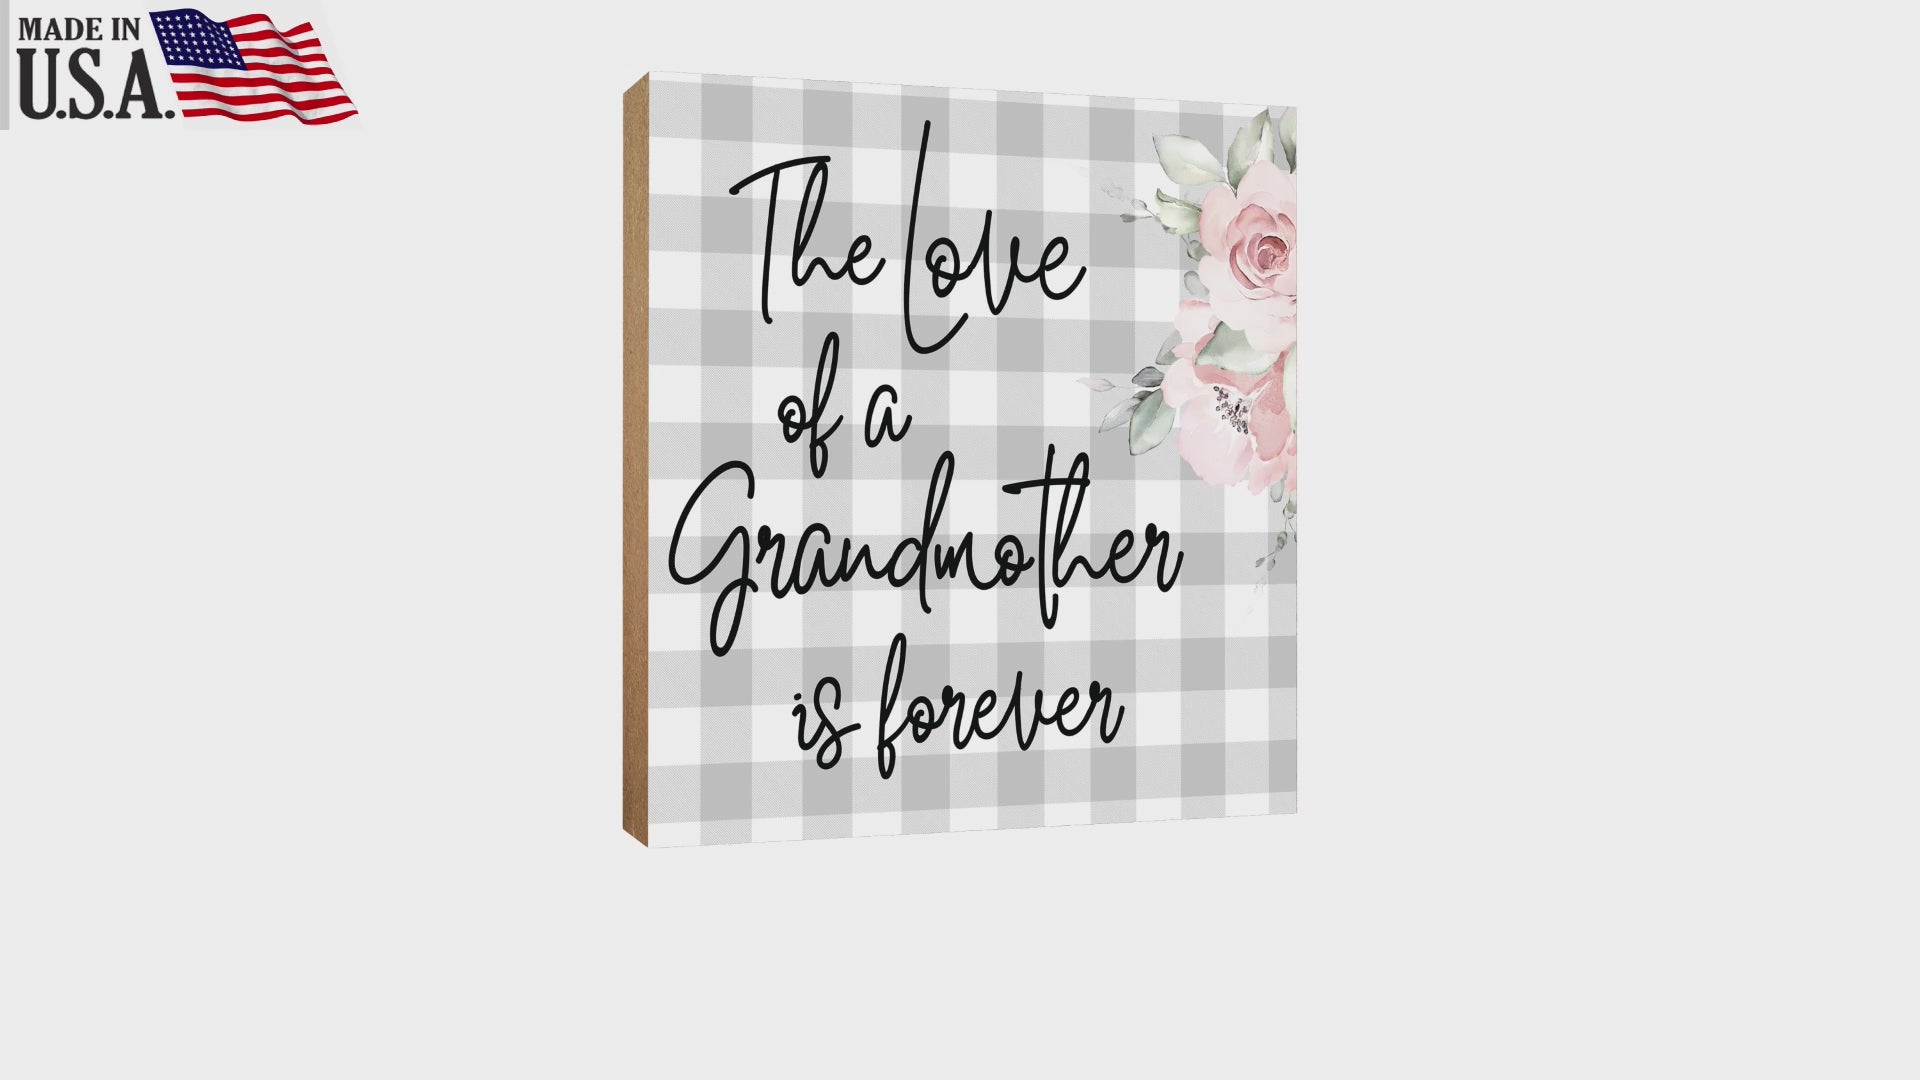 Elegant Home Decor Gift - Unique Shelf Decor and Tabletop Signs, Ideal Mother's Day Gift for Your Beloved Grandmother